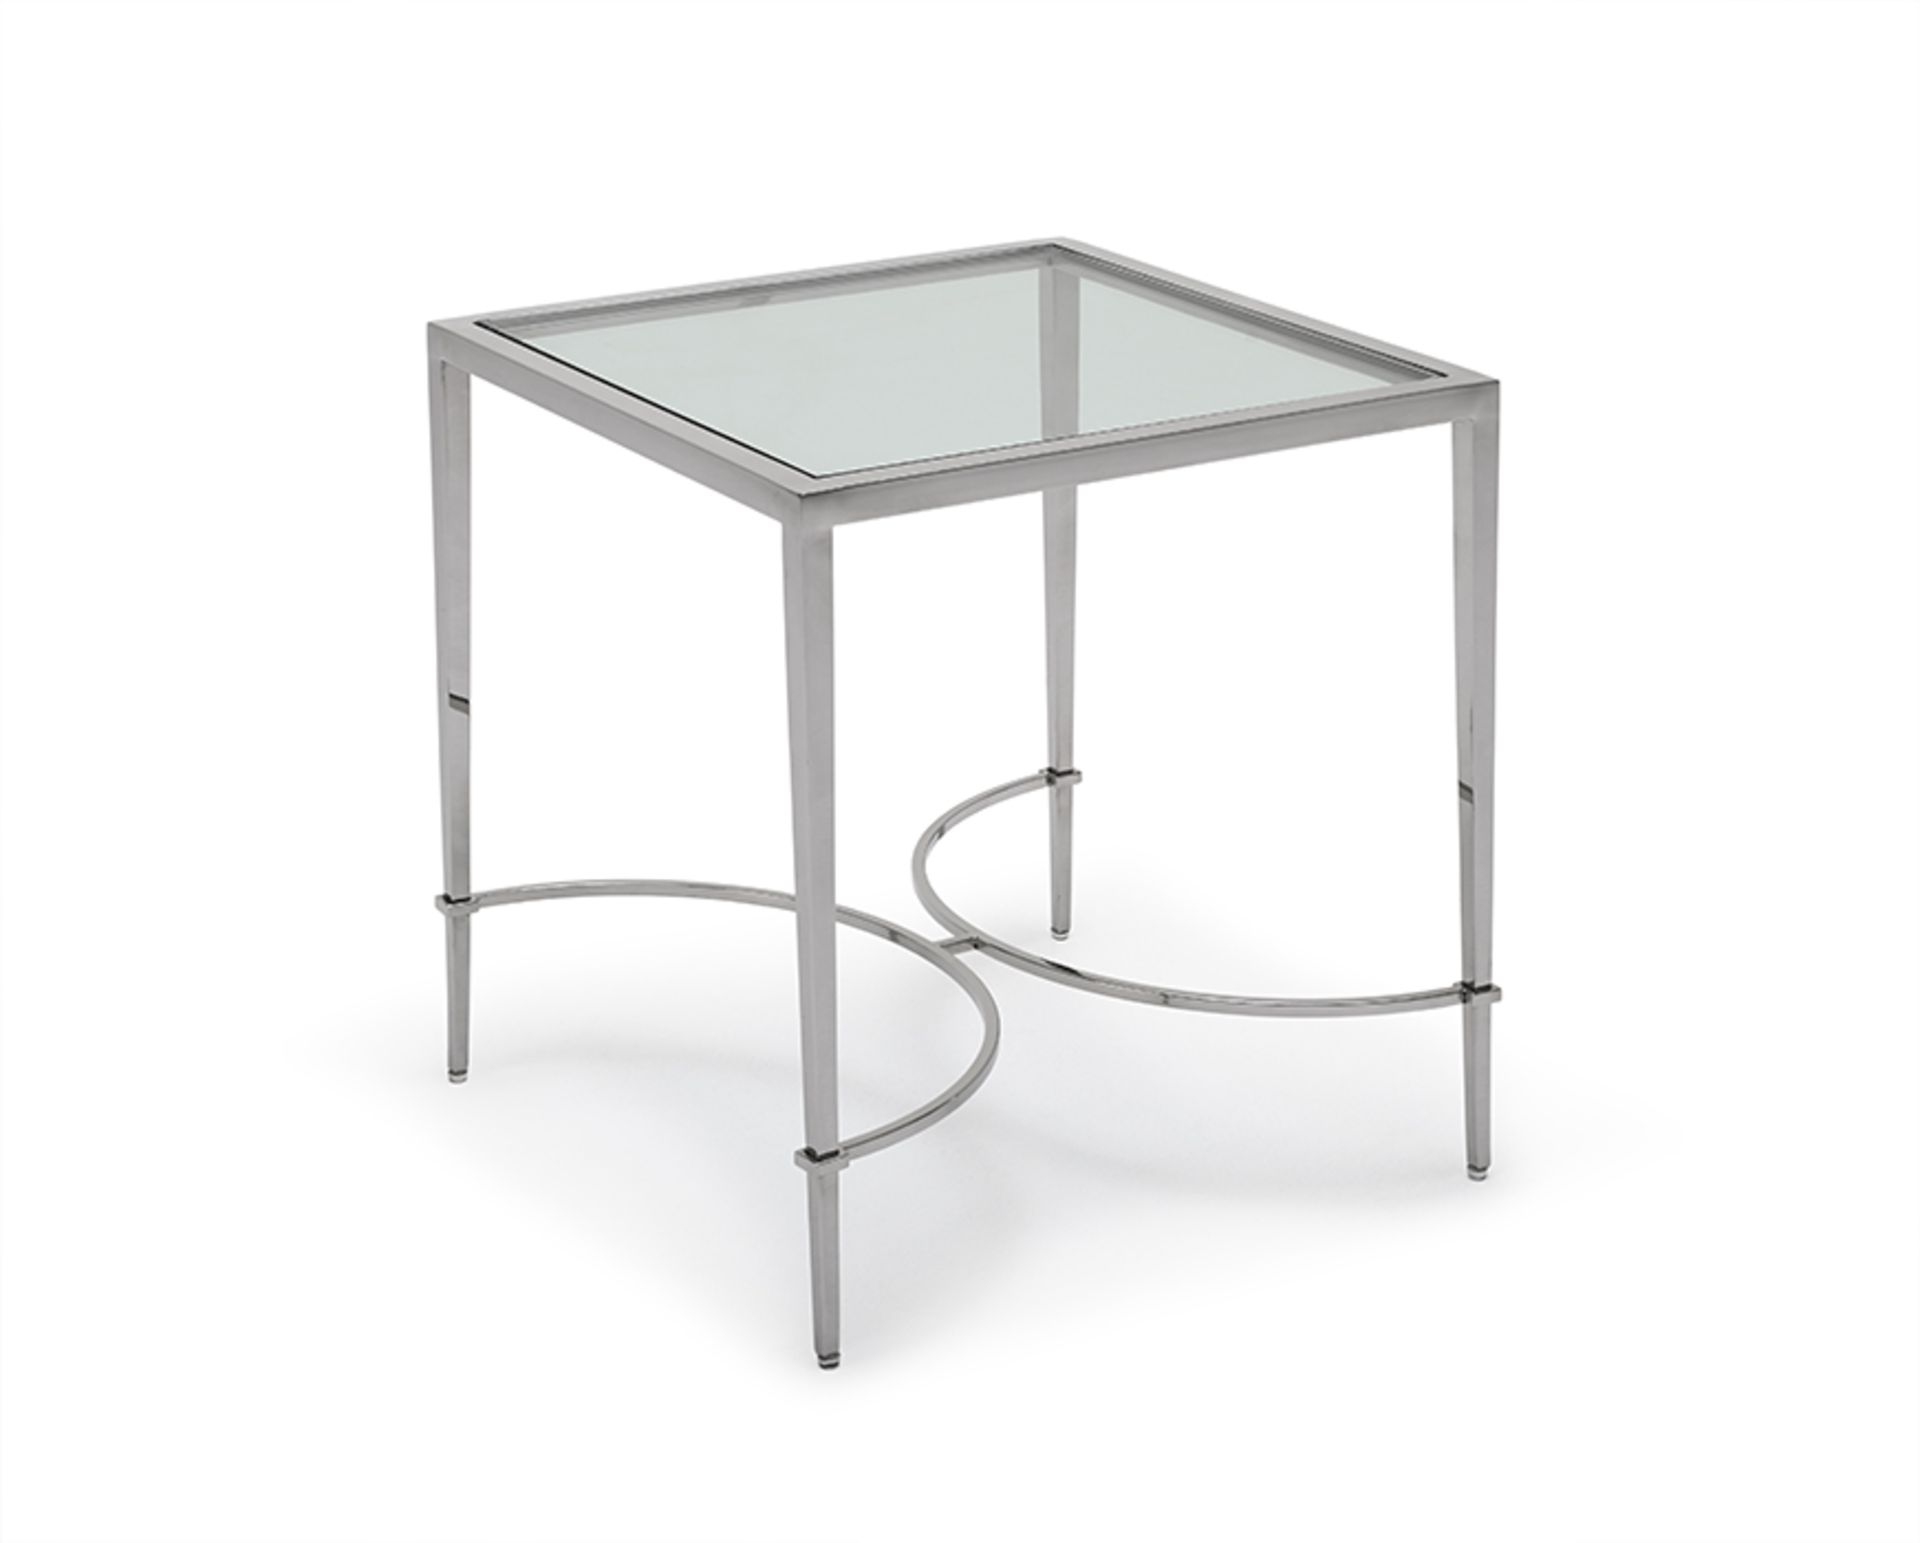 Tokyo Lamp Table by Kesterport The Tokyo lamp table with its clear glass top and a refined tapered - Image 6 of 6